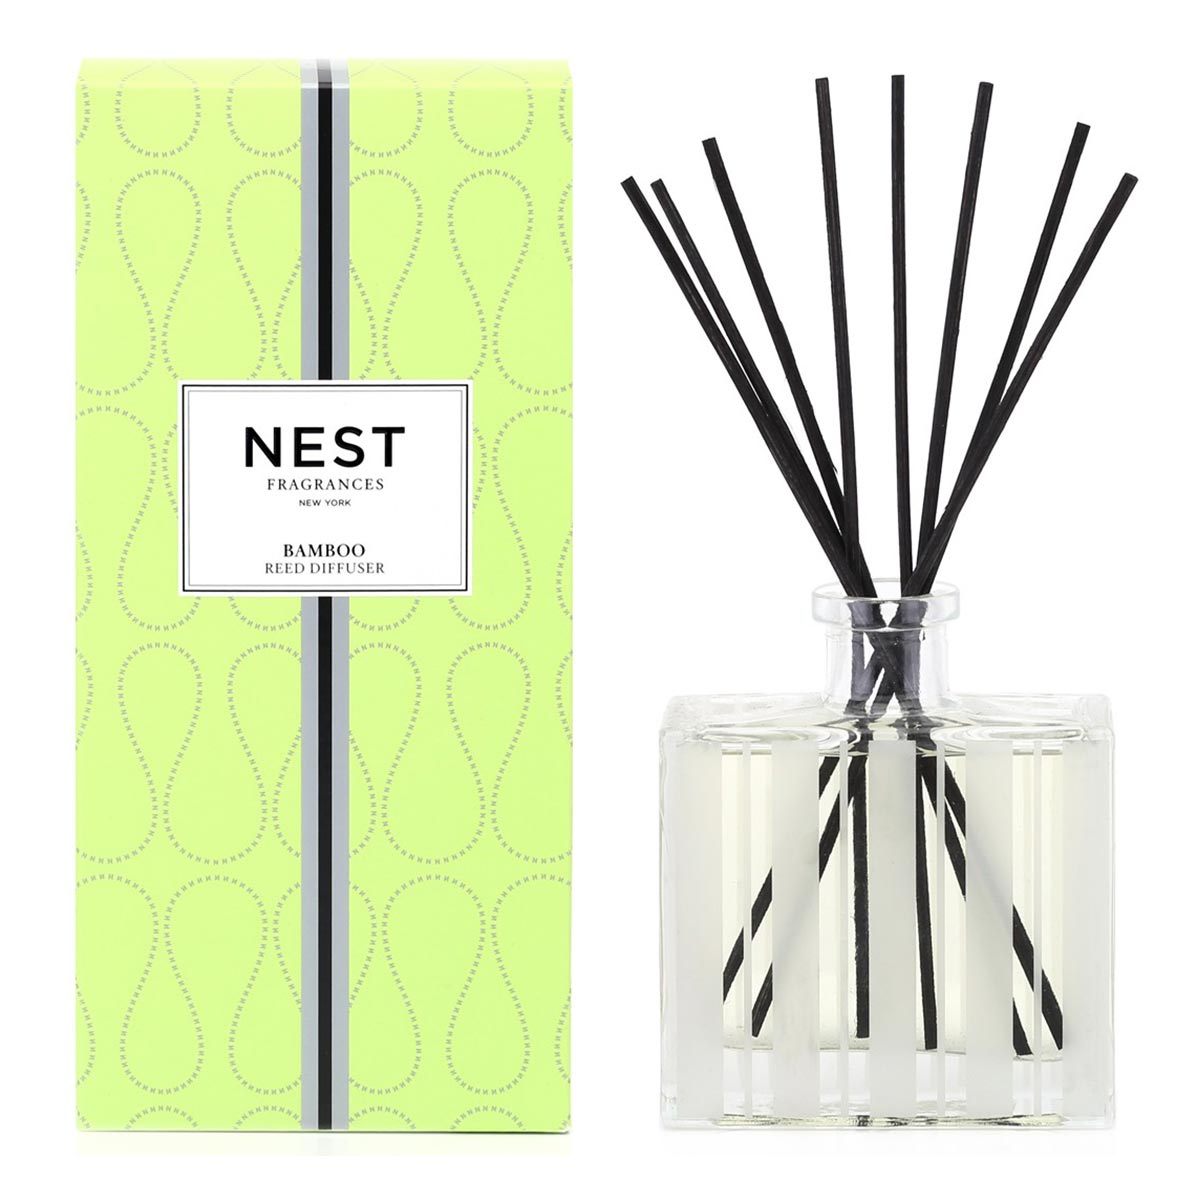 Primary image of Bamboo Reed Diffuser